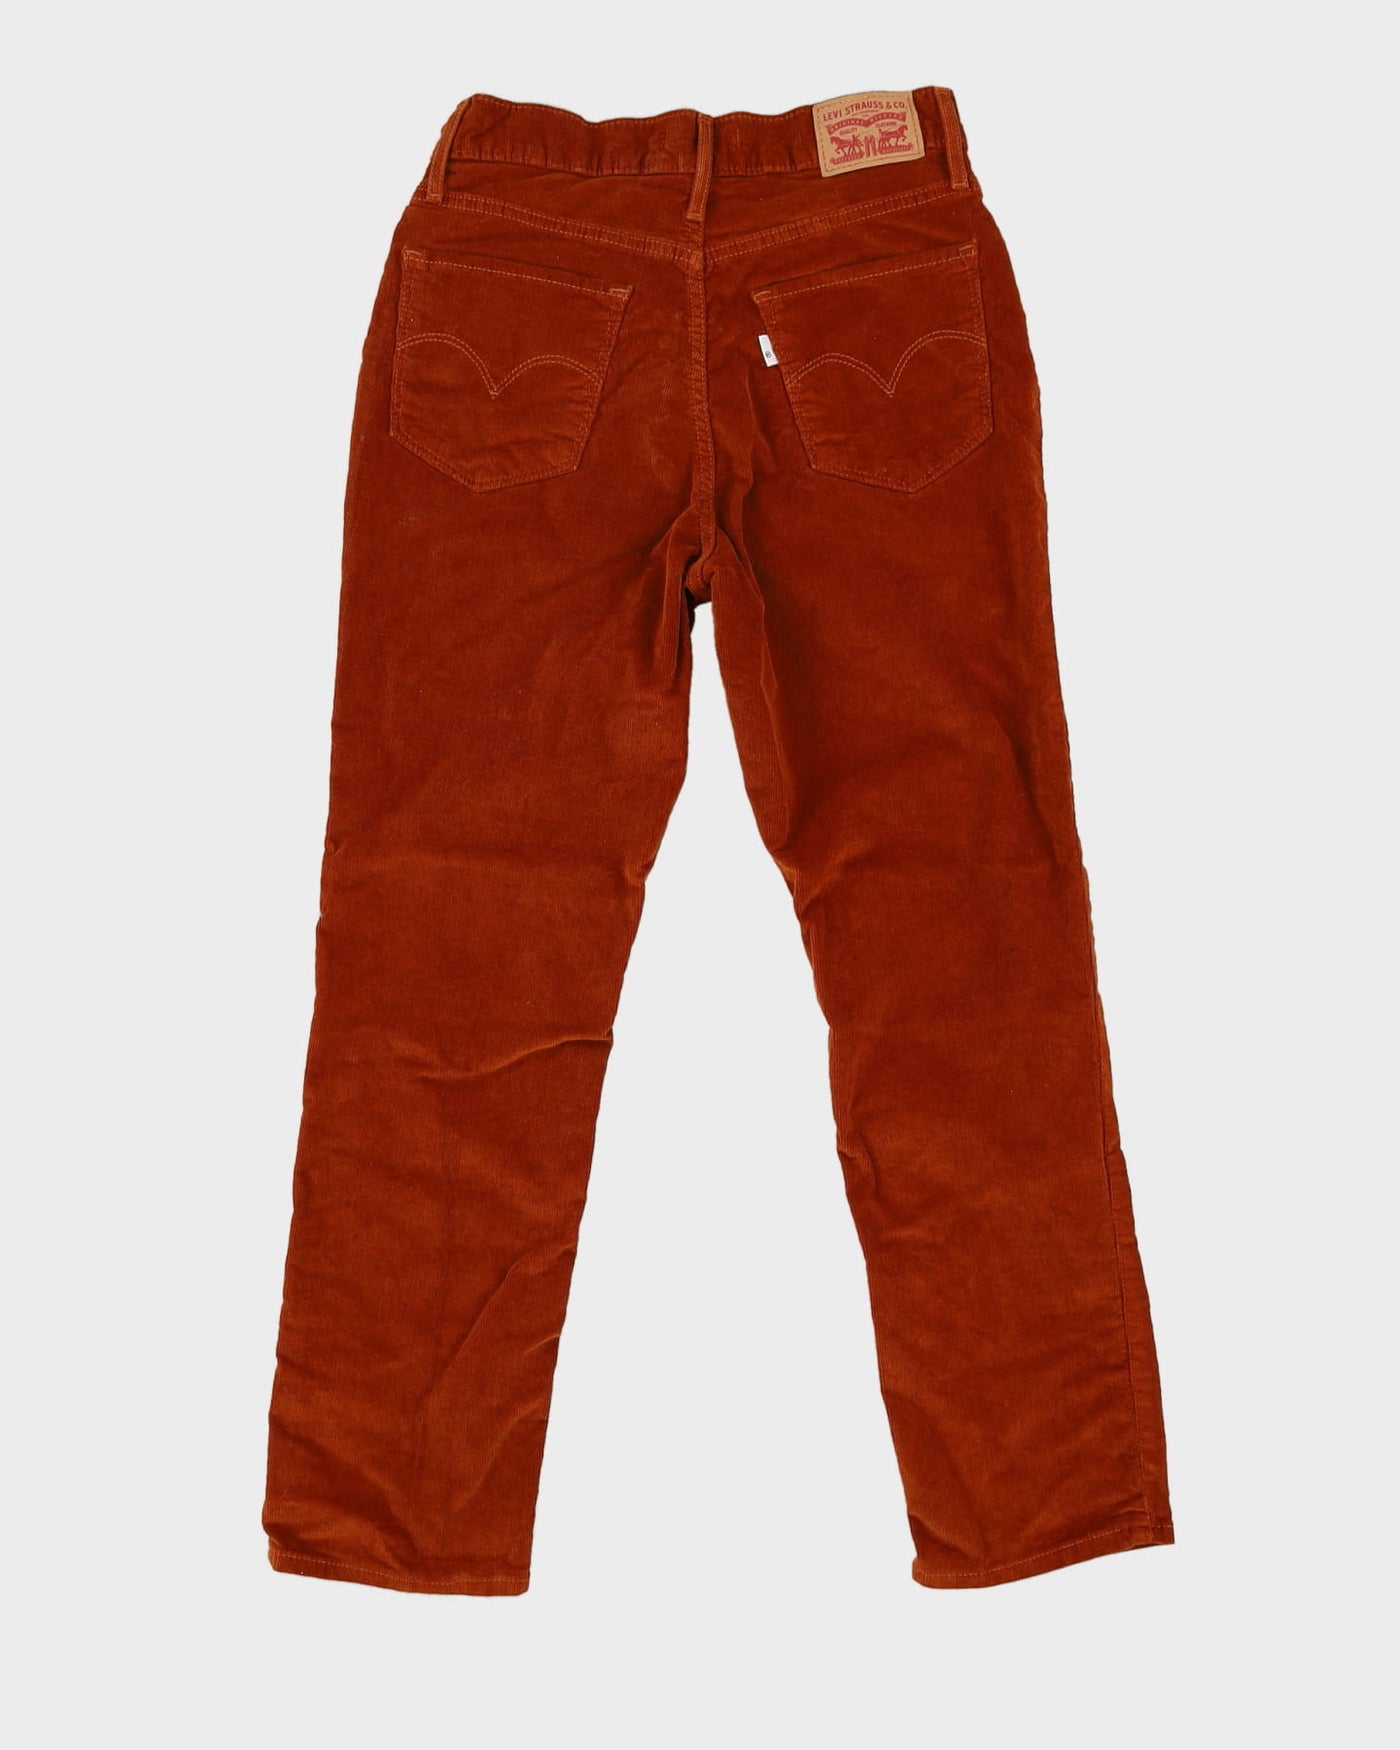 Levi's Brown Cord Trousers - W27 L25